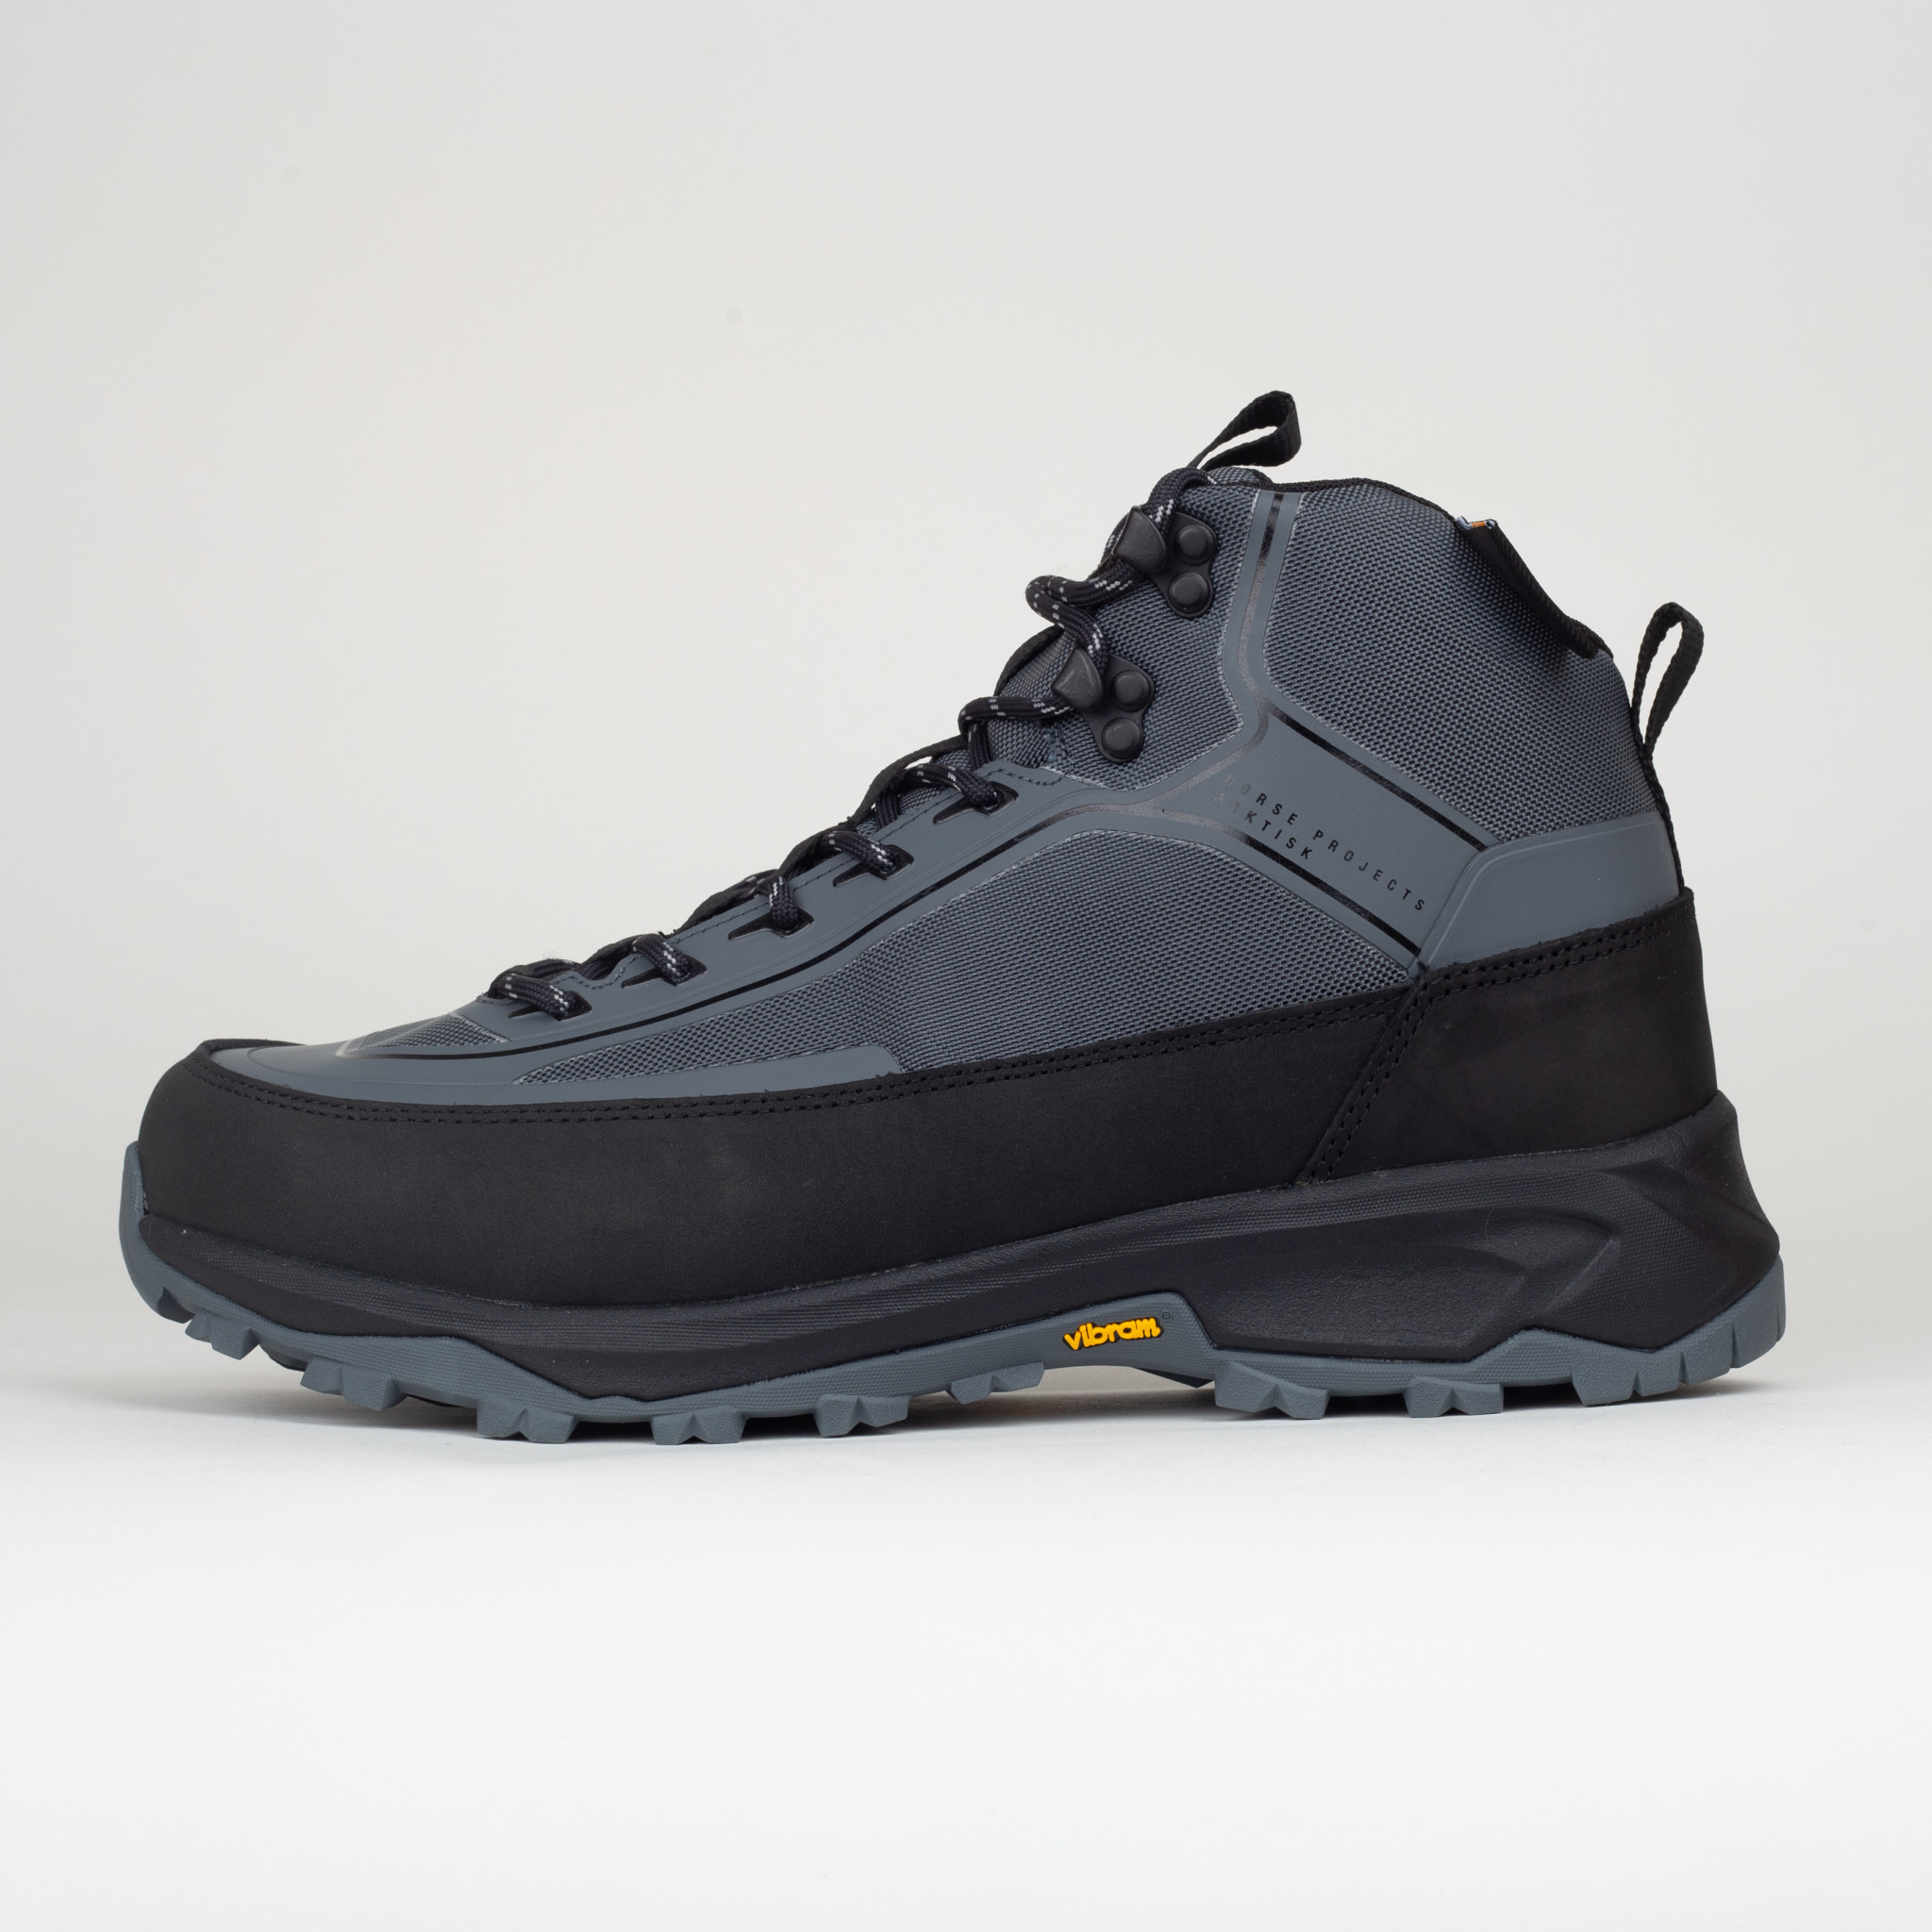 Norse Projects Arktisk Mountain Boot Dark Ice-Blue - DIV. Amsterdam